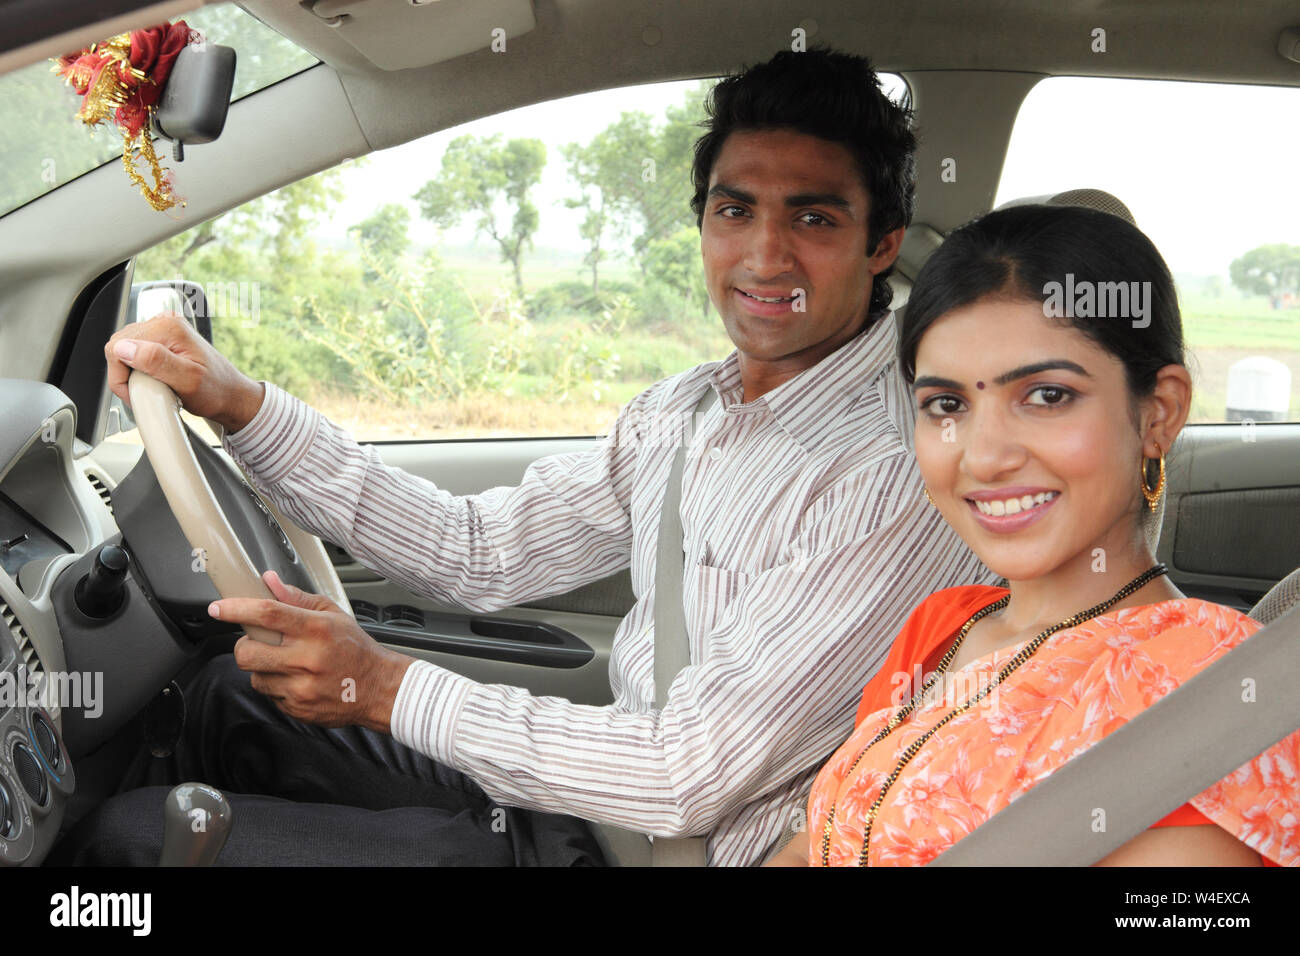 Man driving a car with his wife and smiling Stock Photo